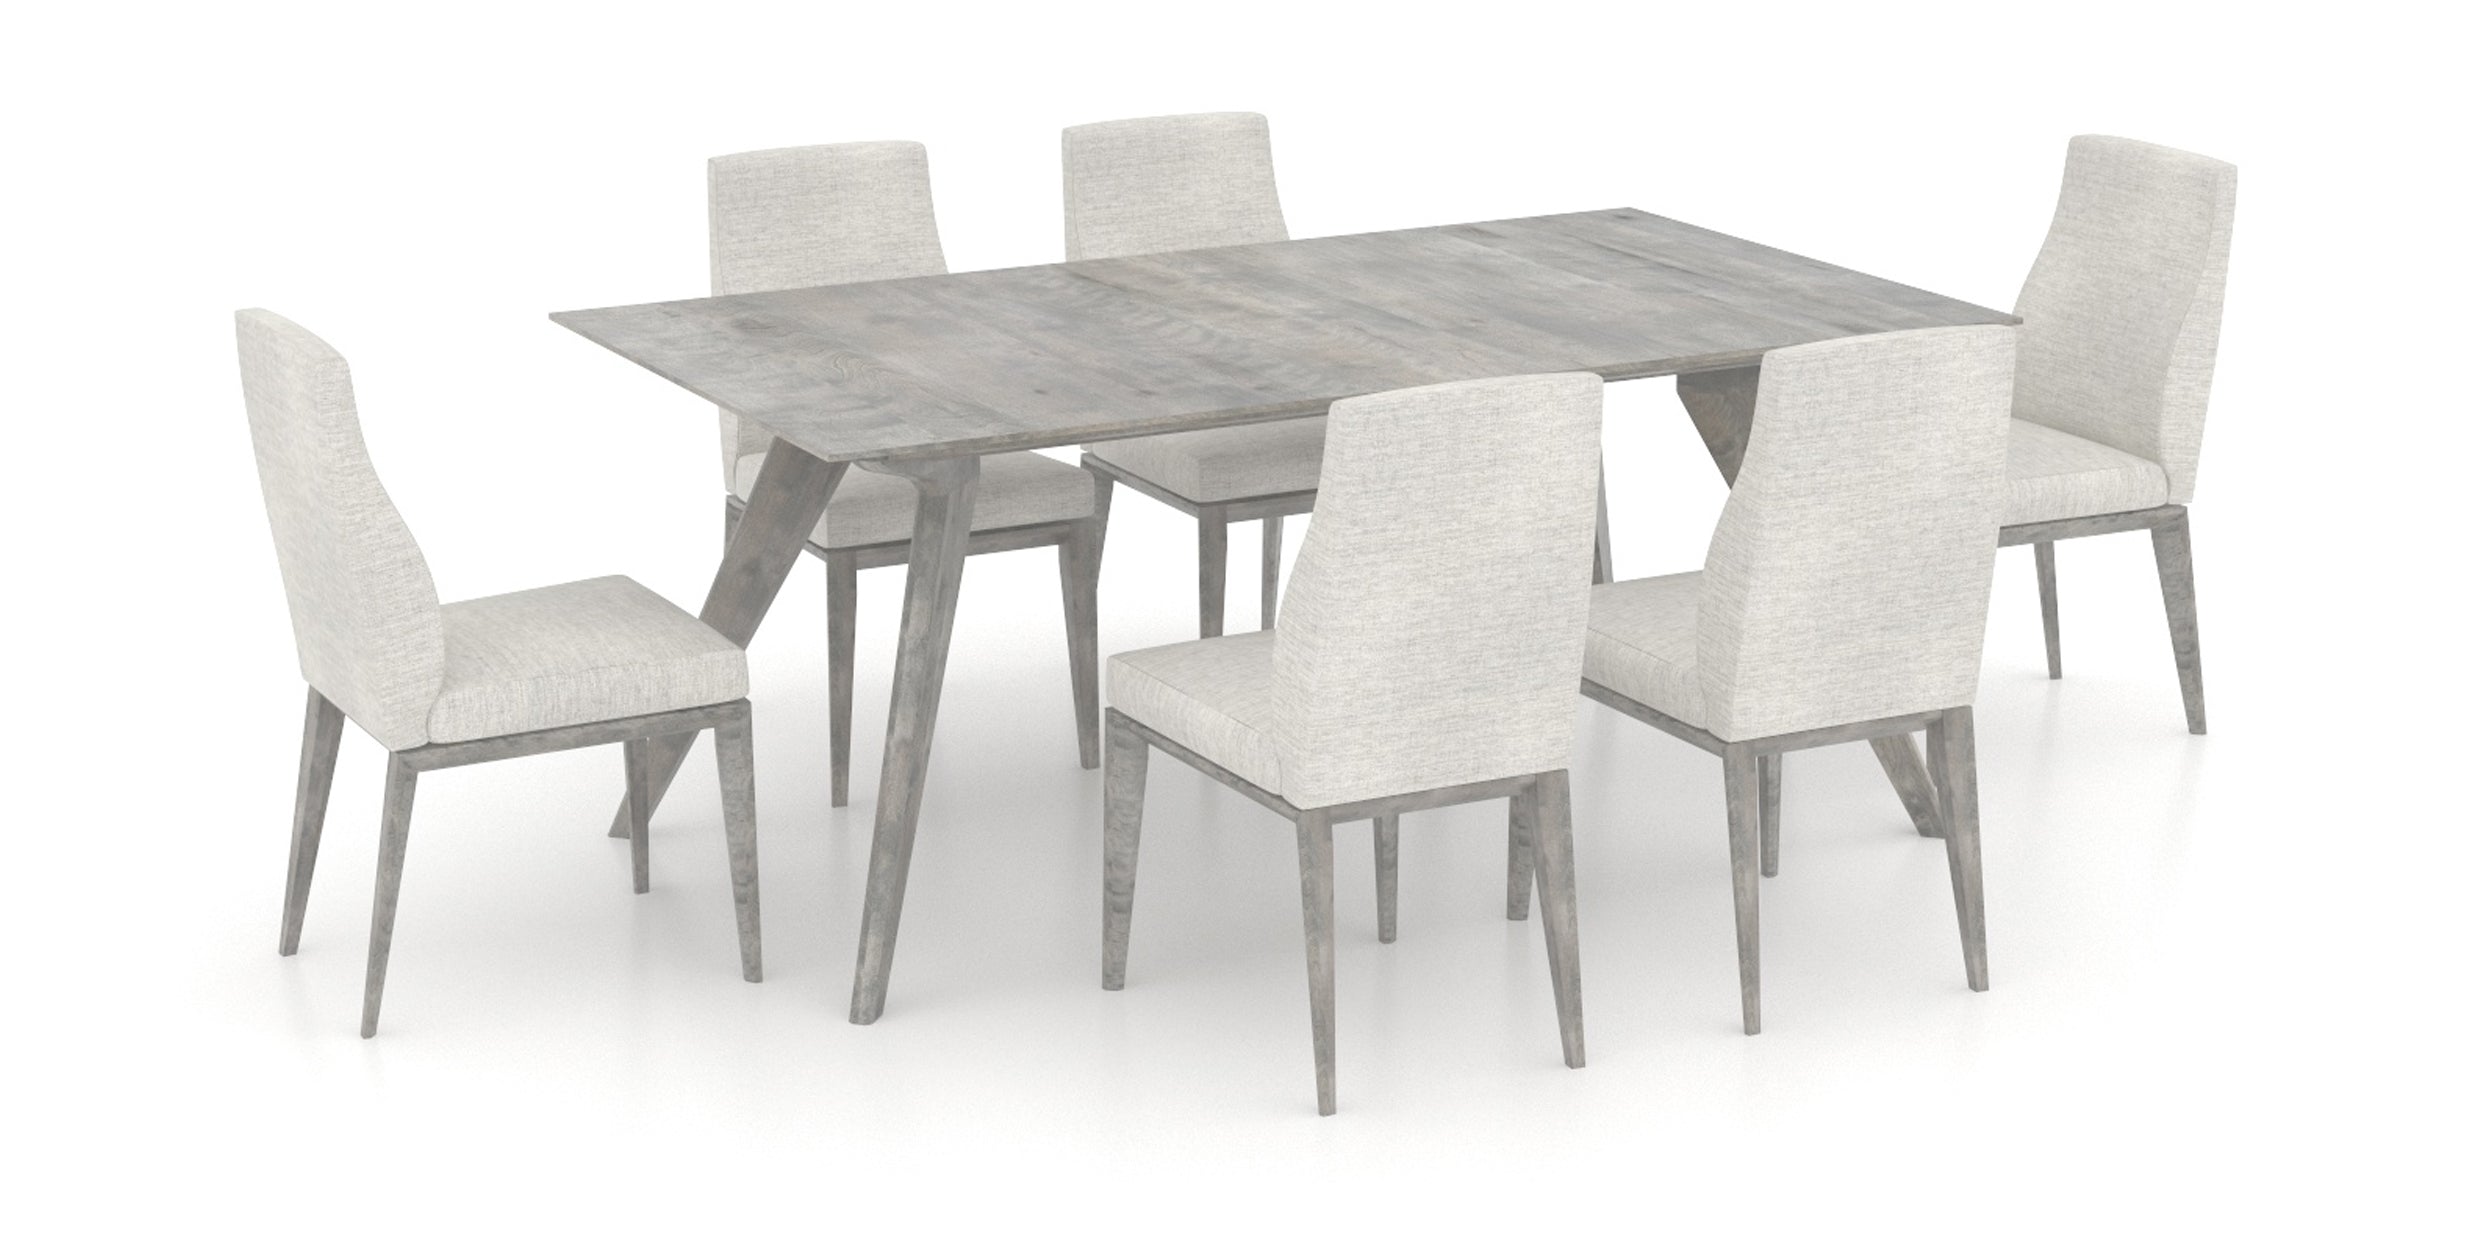 Shadow Birch with Matte Finish and AC Fabric | Canadel Downtown 4072 Dining Set with Fabric Upholstered Dining Chairs | Valley Ridge Furniture